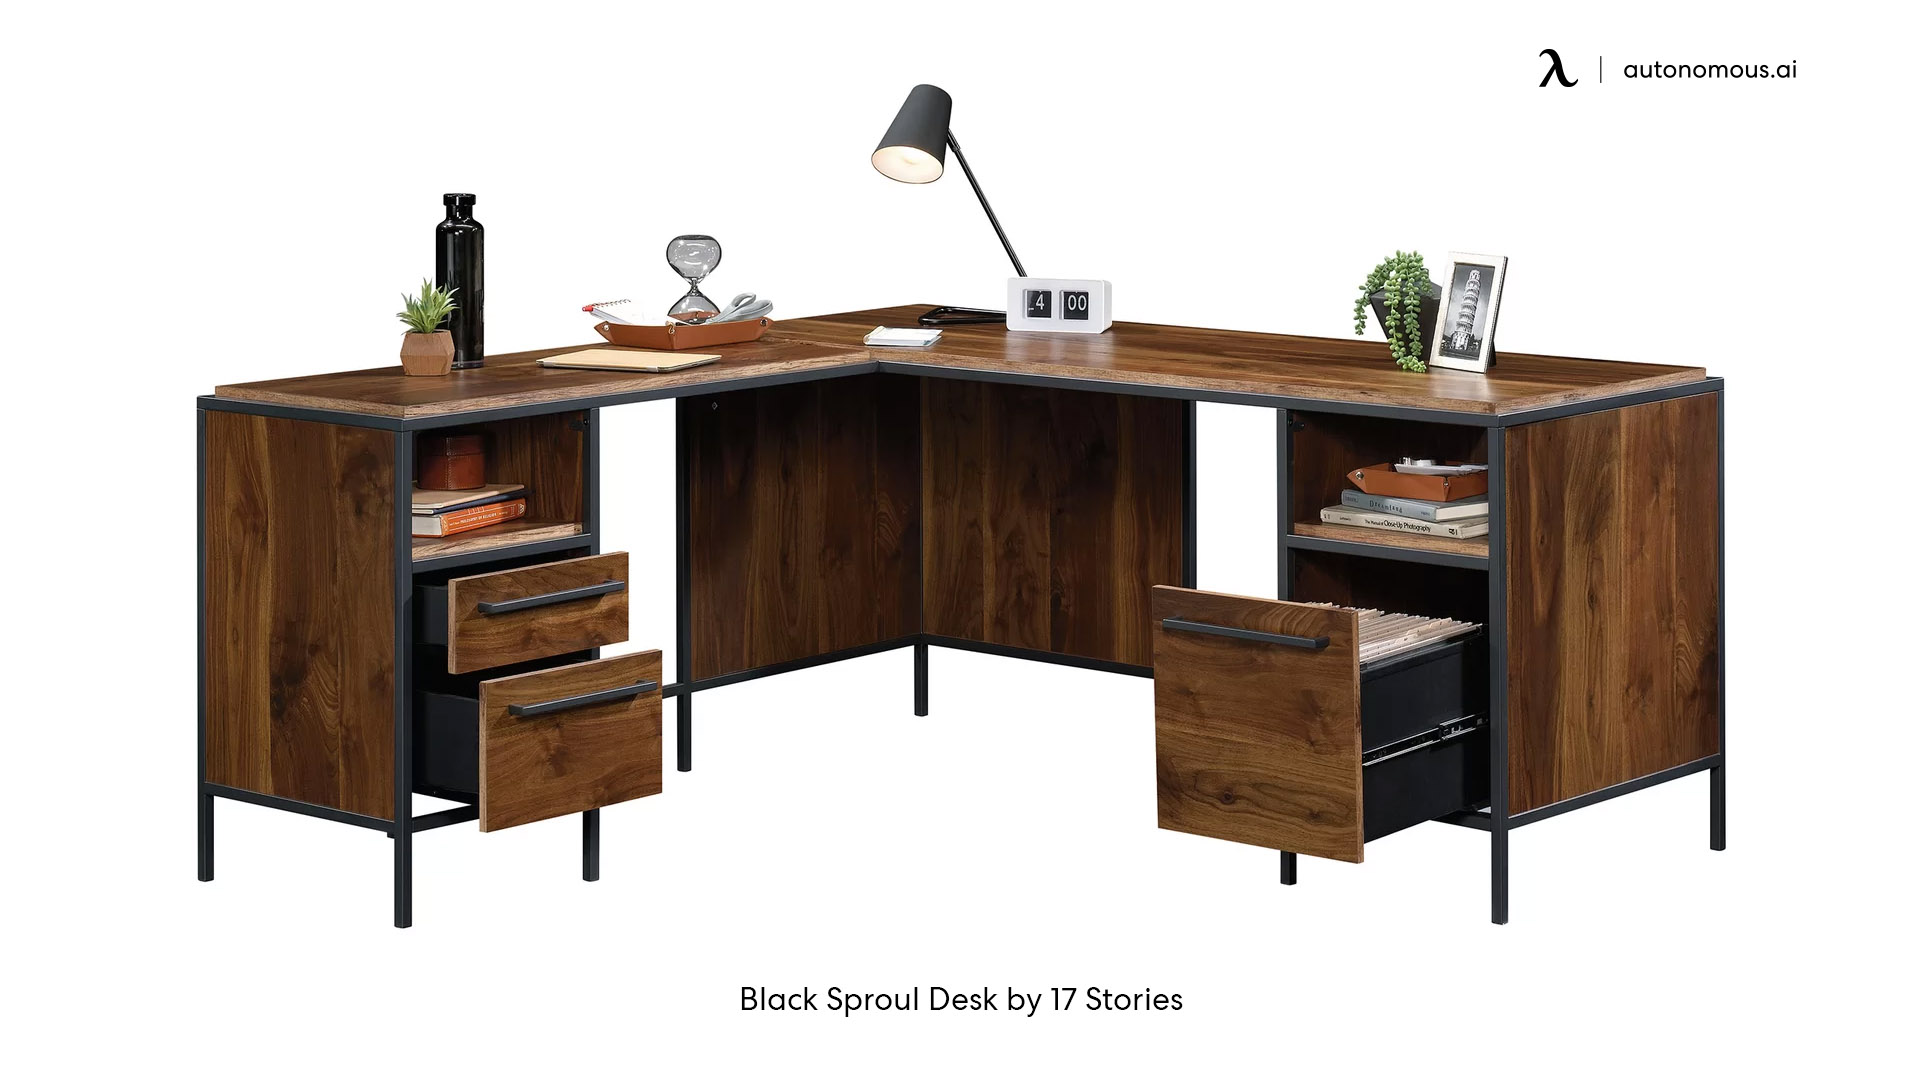 Black Sproul Desk by 17 Stories